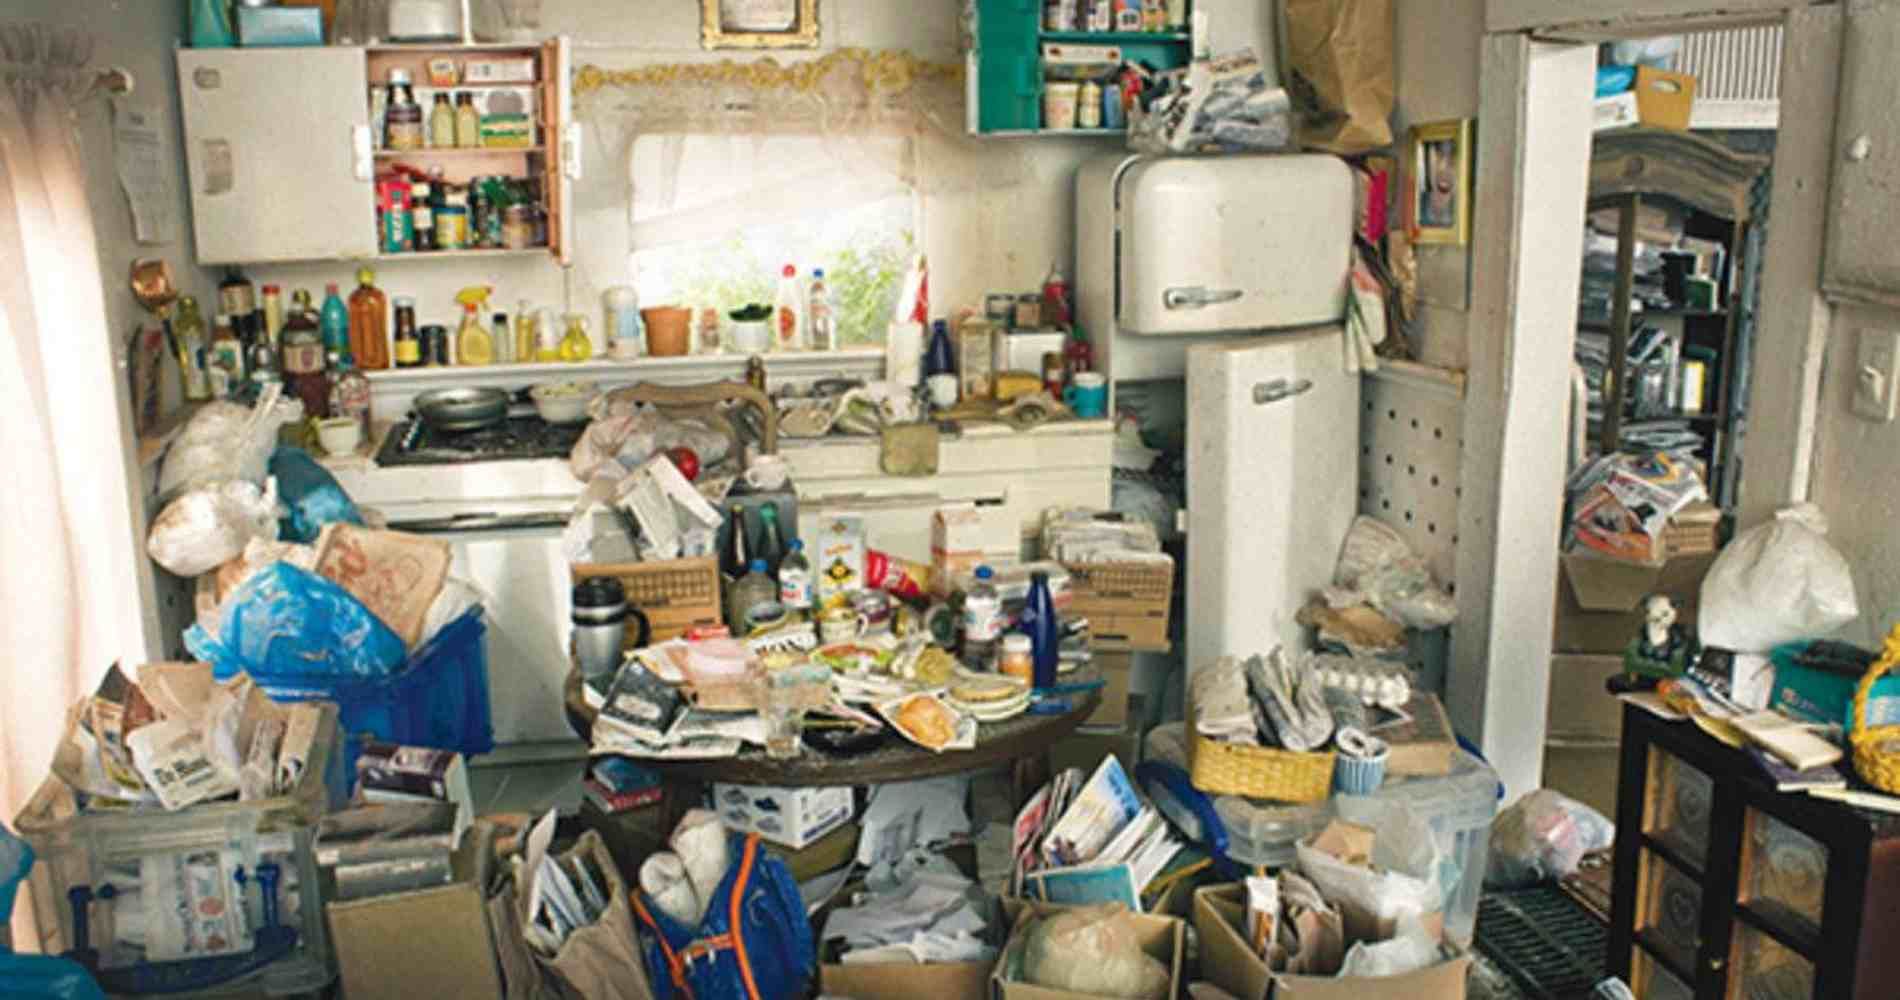 #1 for Hoarding Cleanup in Maricopa, AZ with Over 1200 5-Star Reviews!